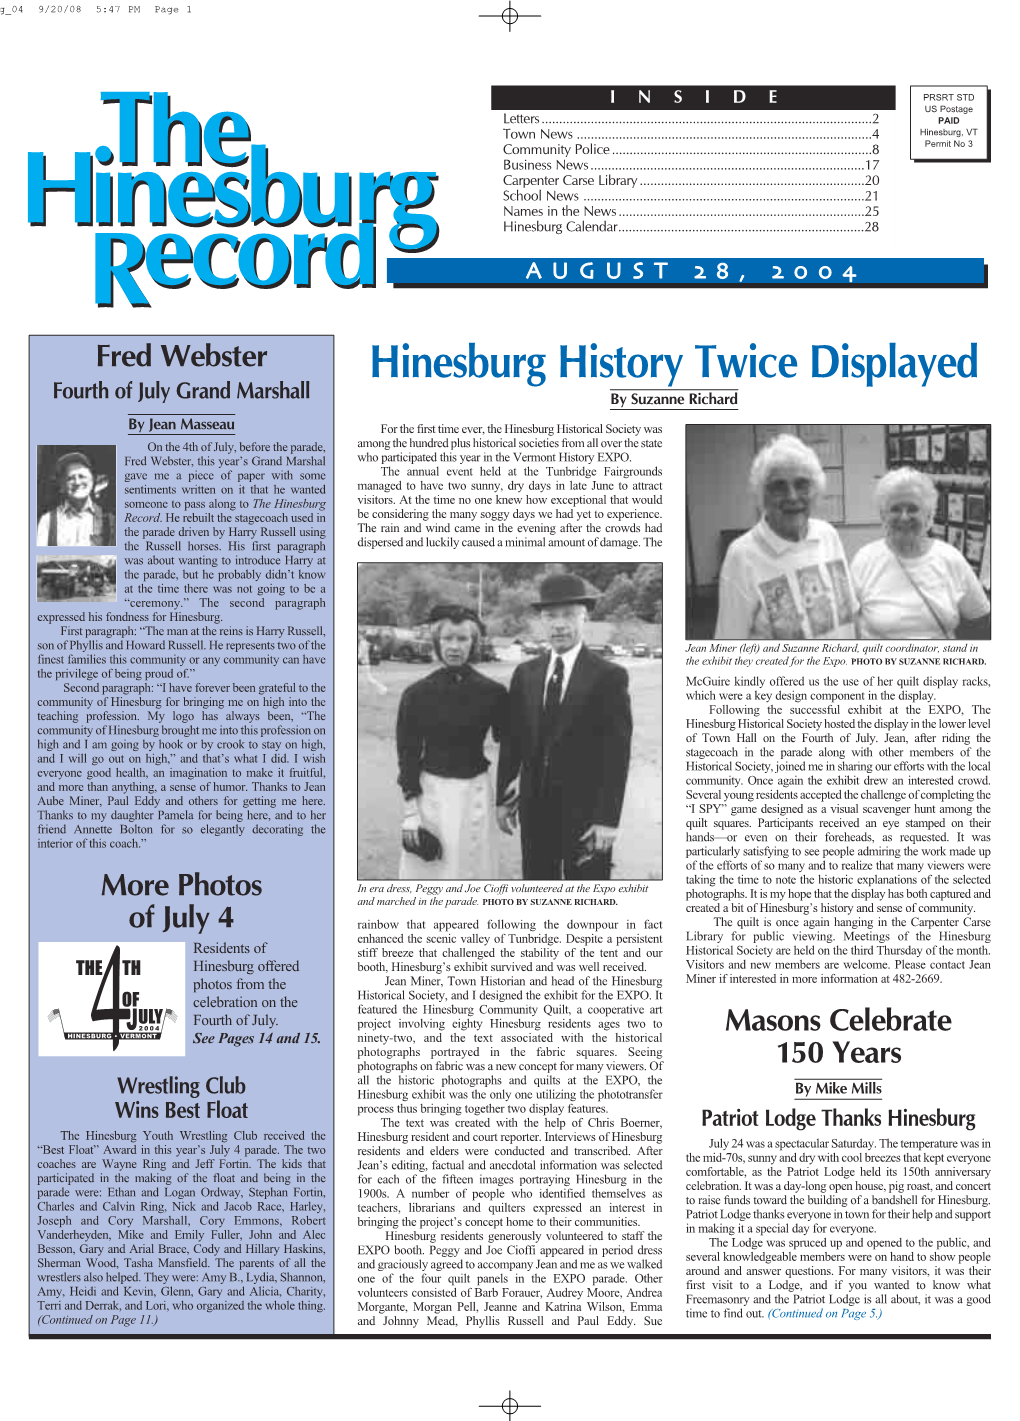 Hinesburg History Twice Displayed Fourth of July Grand Marshall by Suzanne Richard